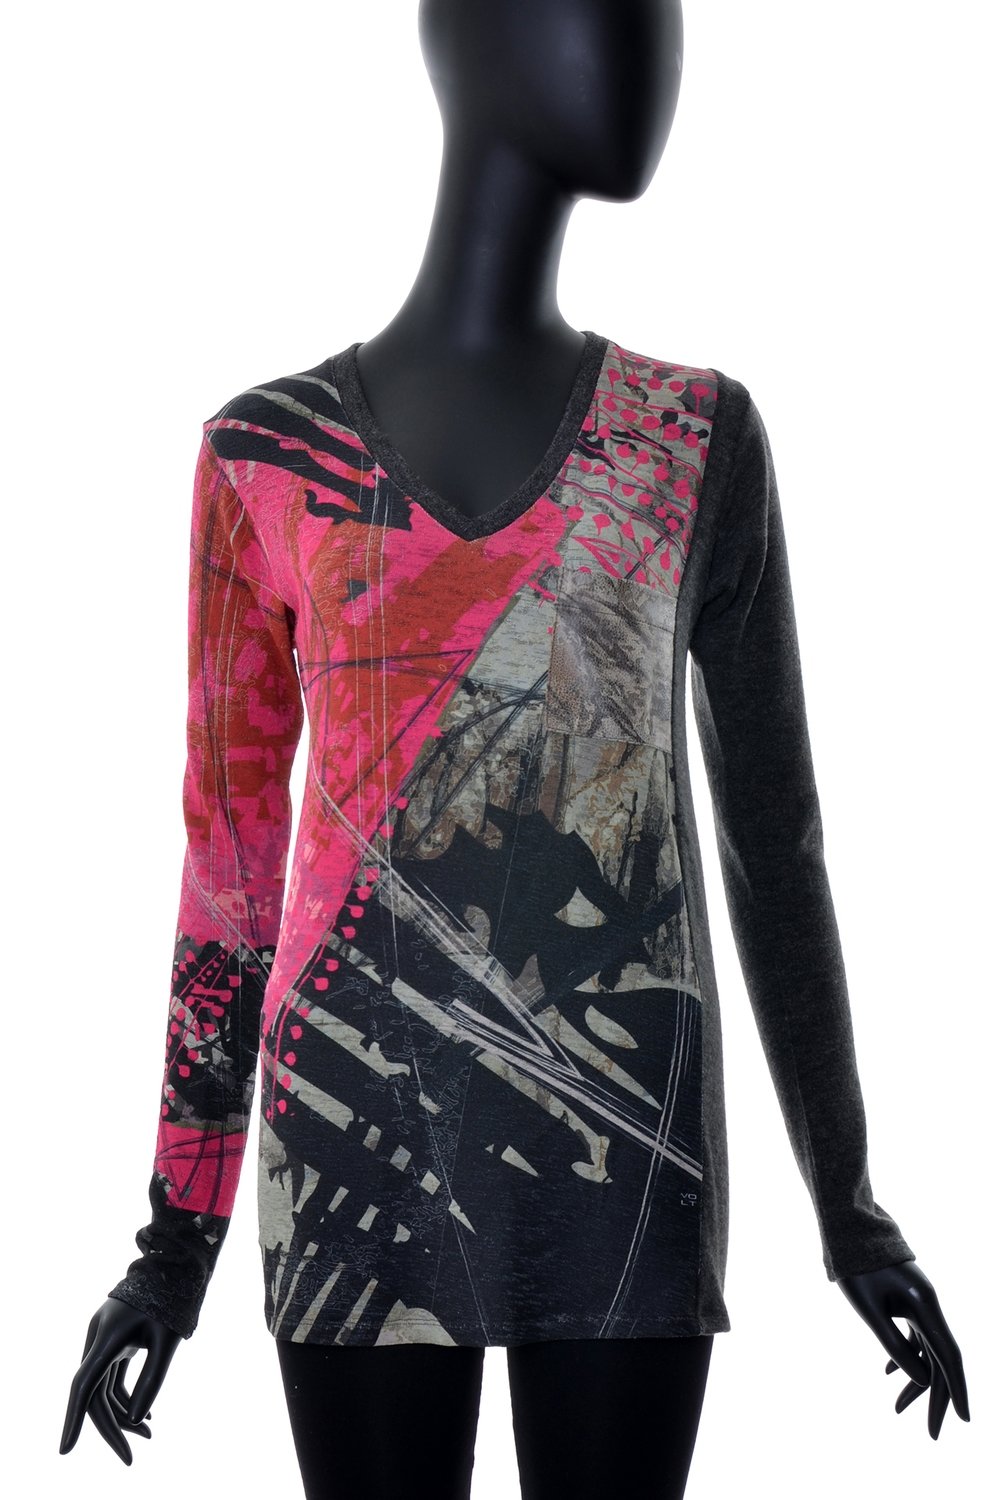 Volt Design: Pink Forest Abstract Art Tunic SOLD OUT